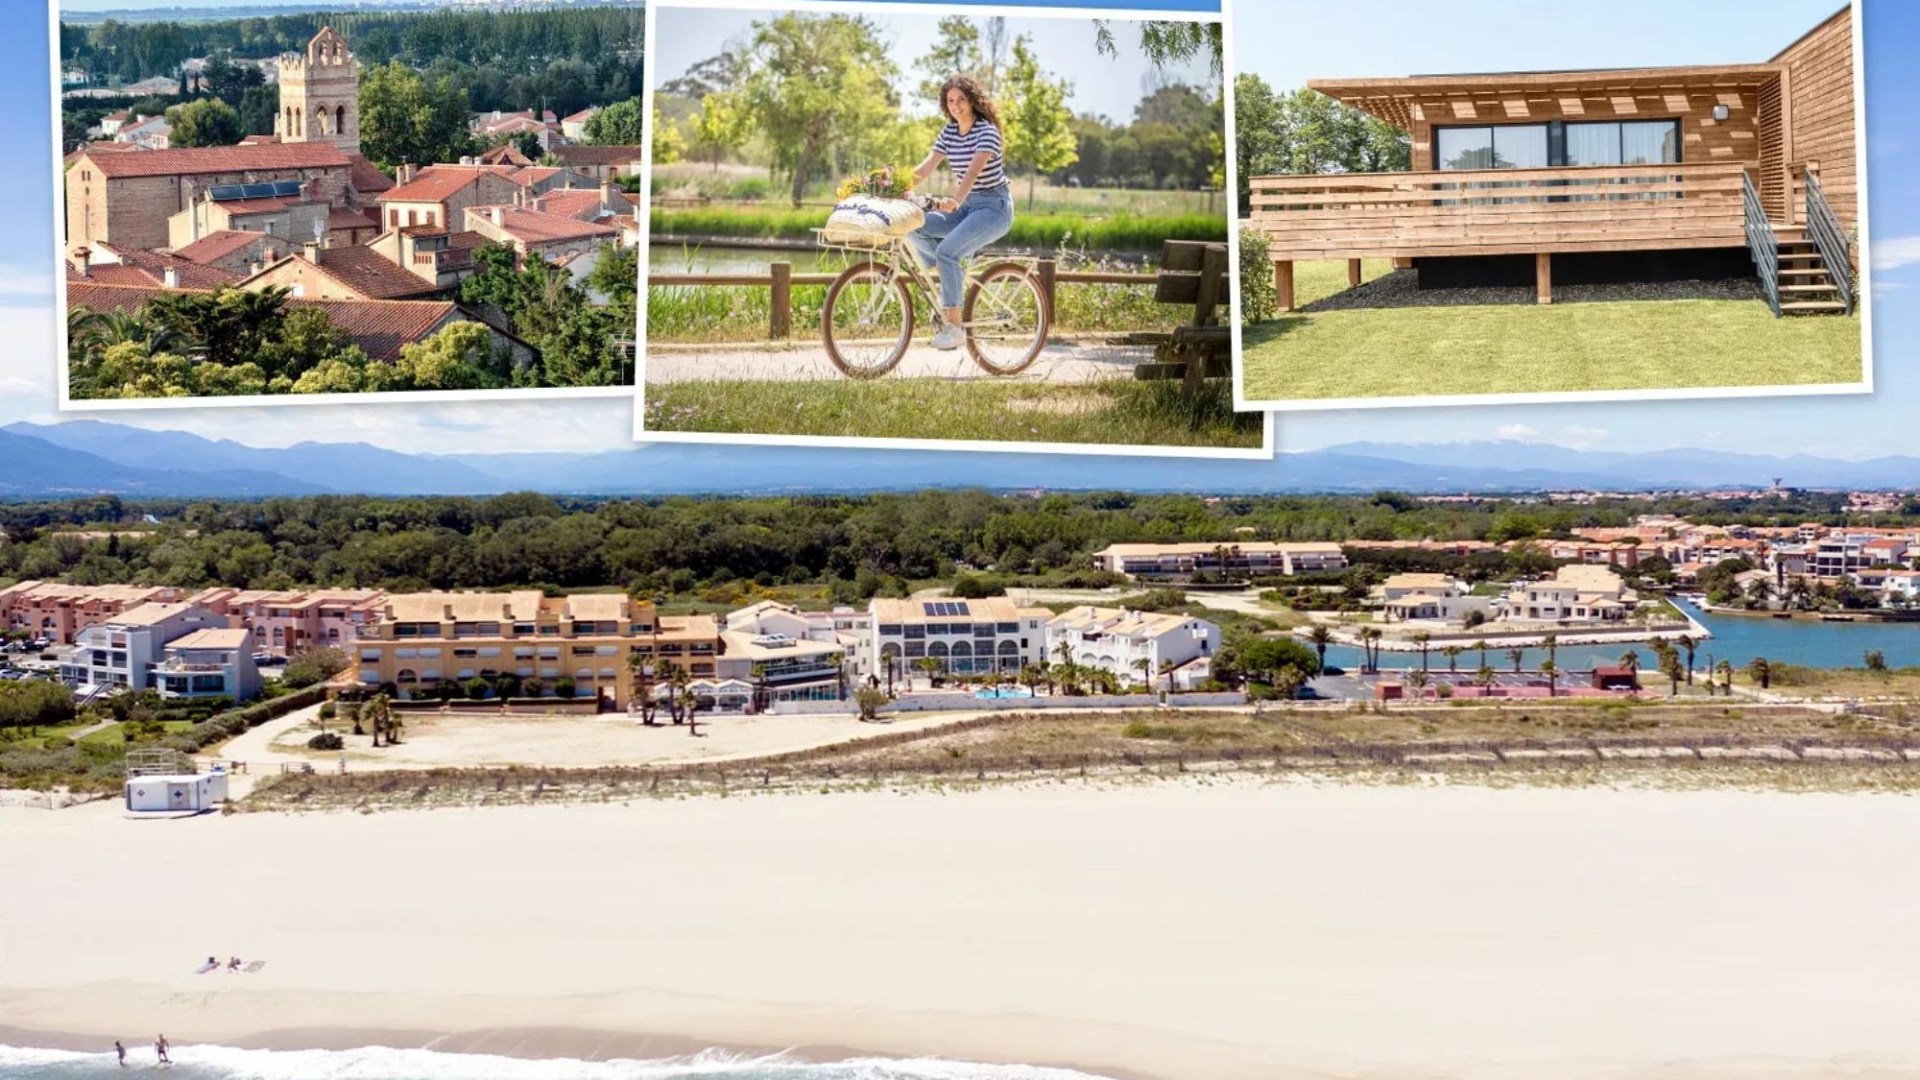 Discover the Best Deals on Family-Friendly Villas and Ryanair Flights to a Charming French Coastal Town!